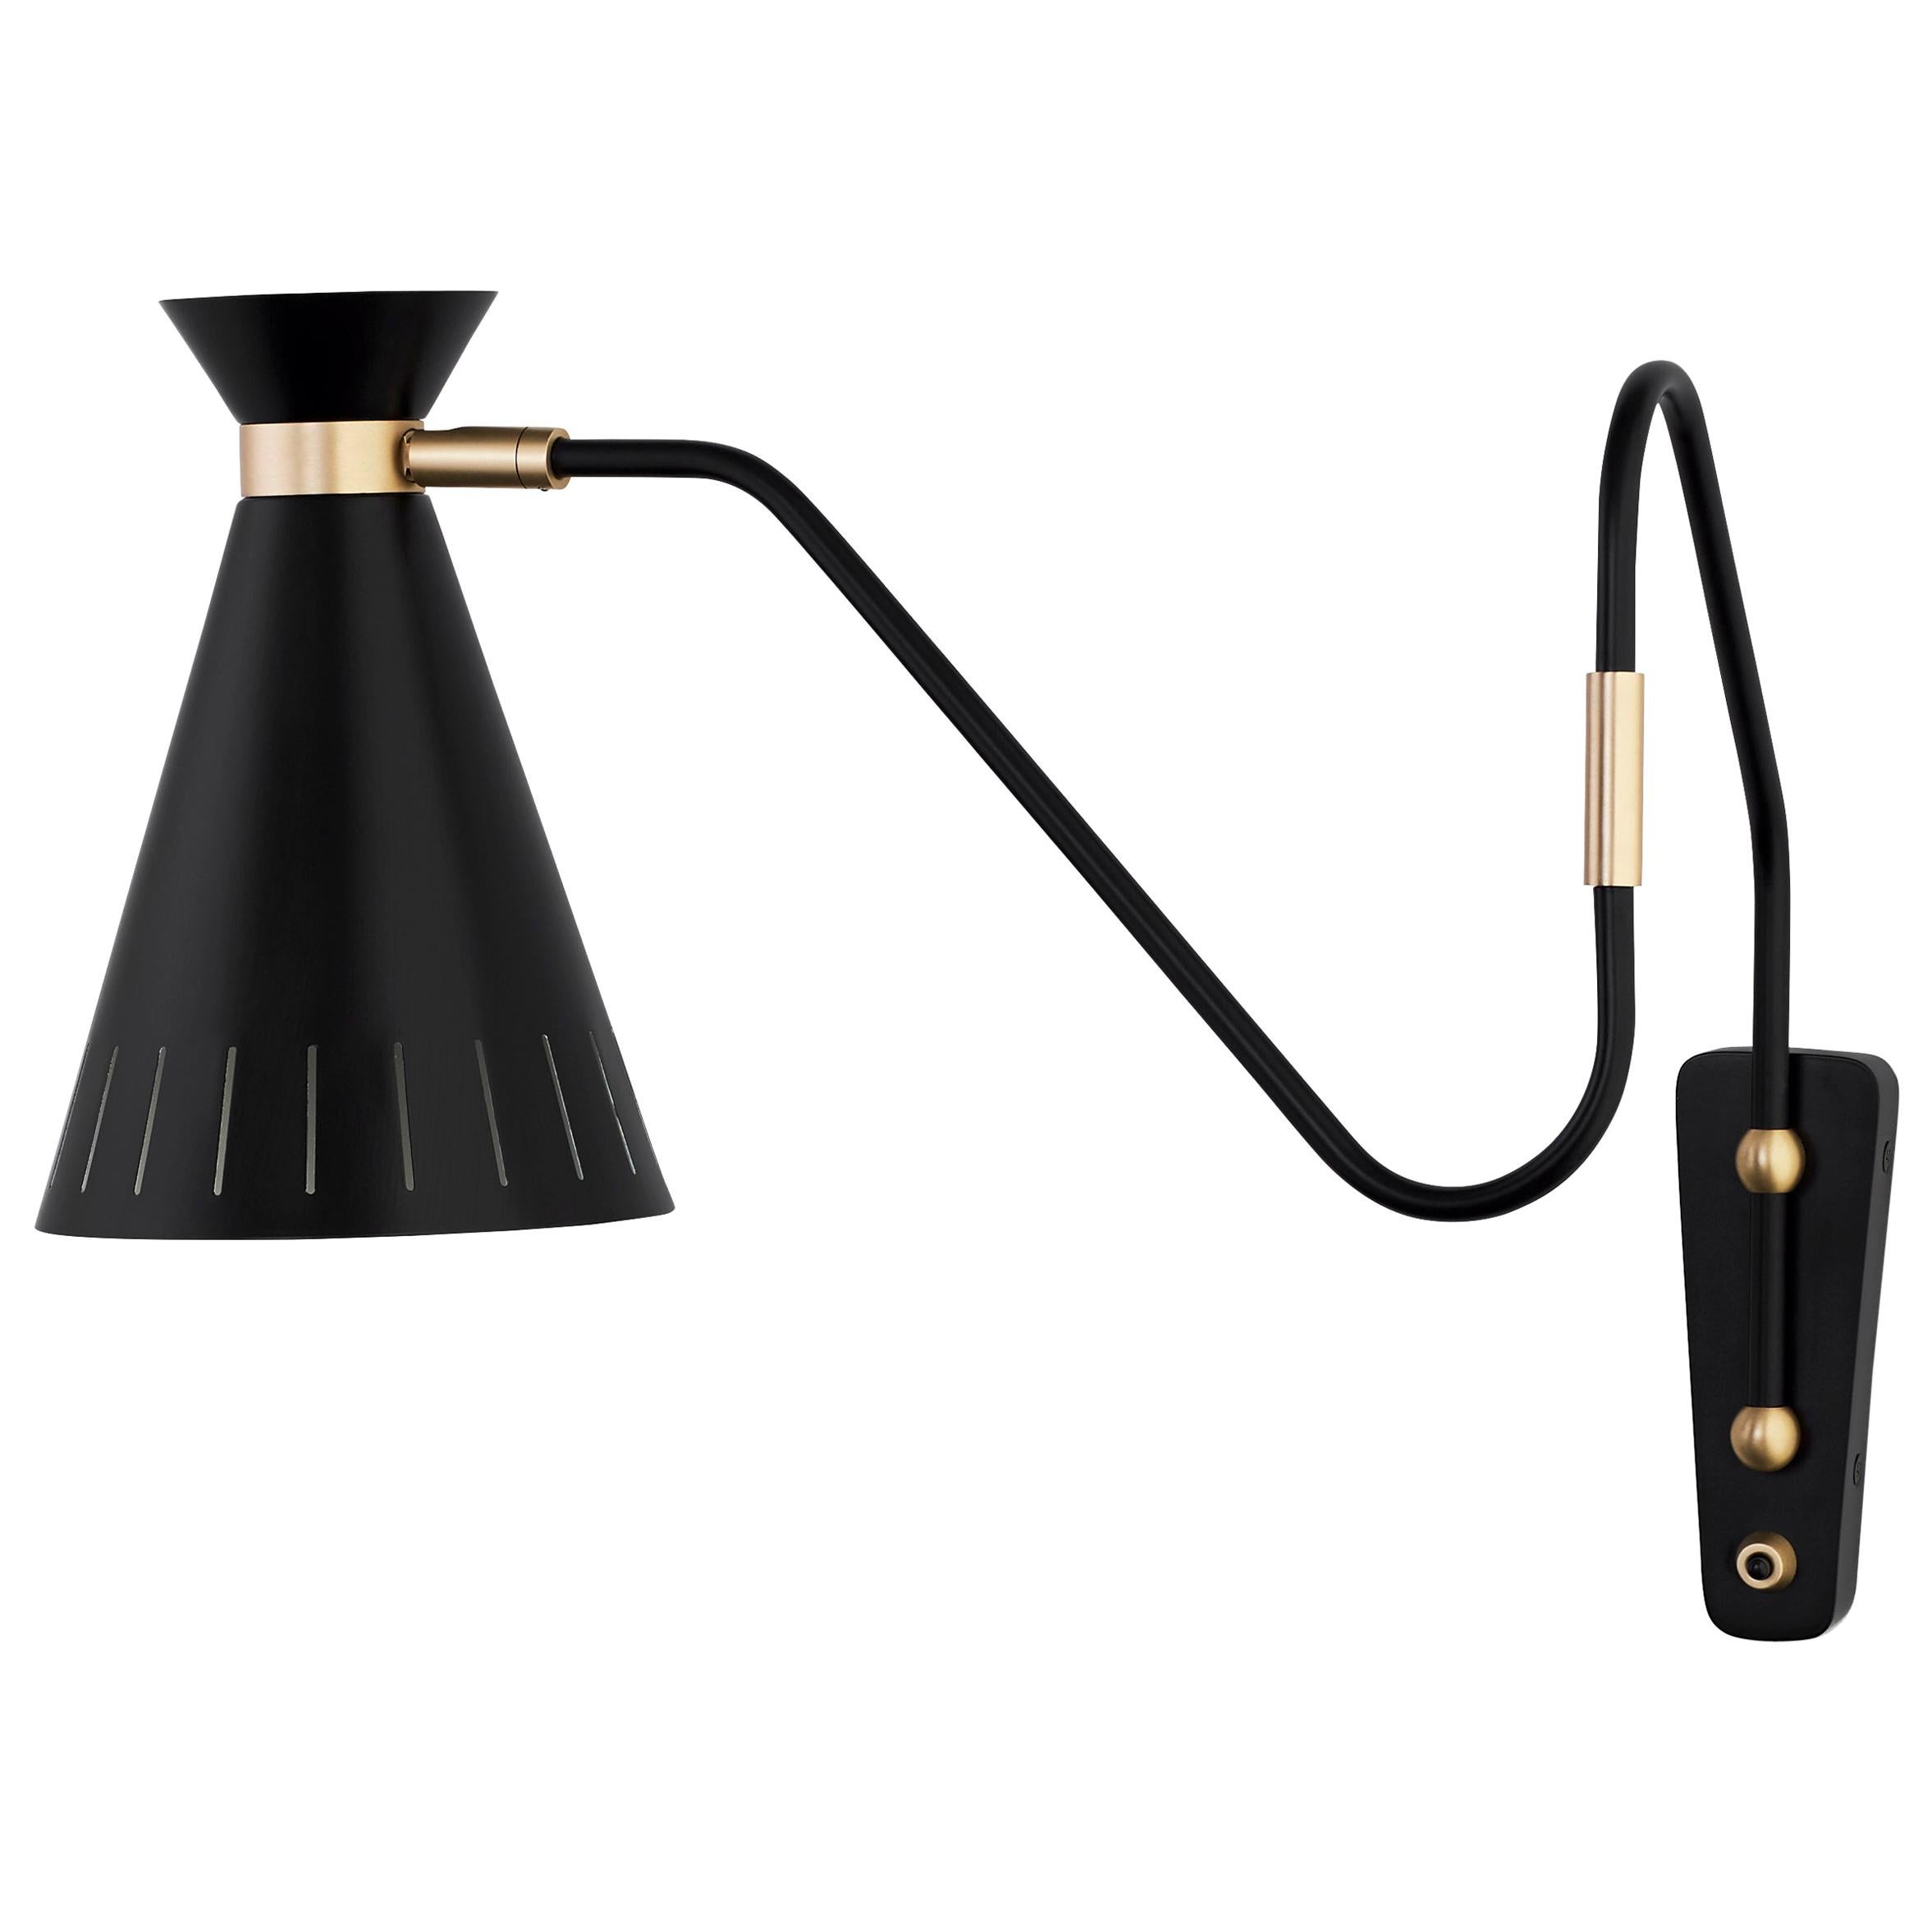 For Sale: Black Cone Wall Lamp, by Svend Aage Holm-Sørensen from Warm Nordic